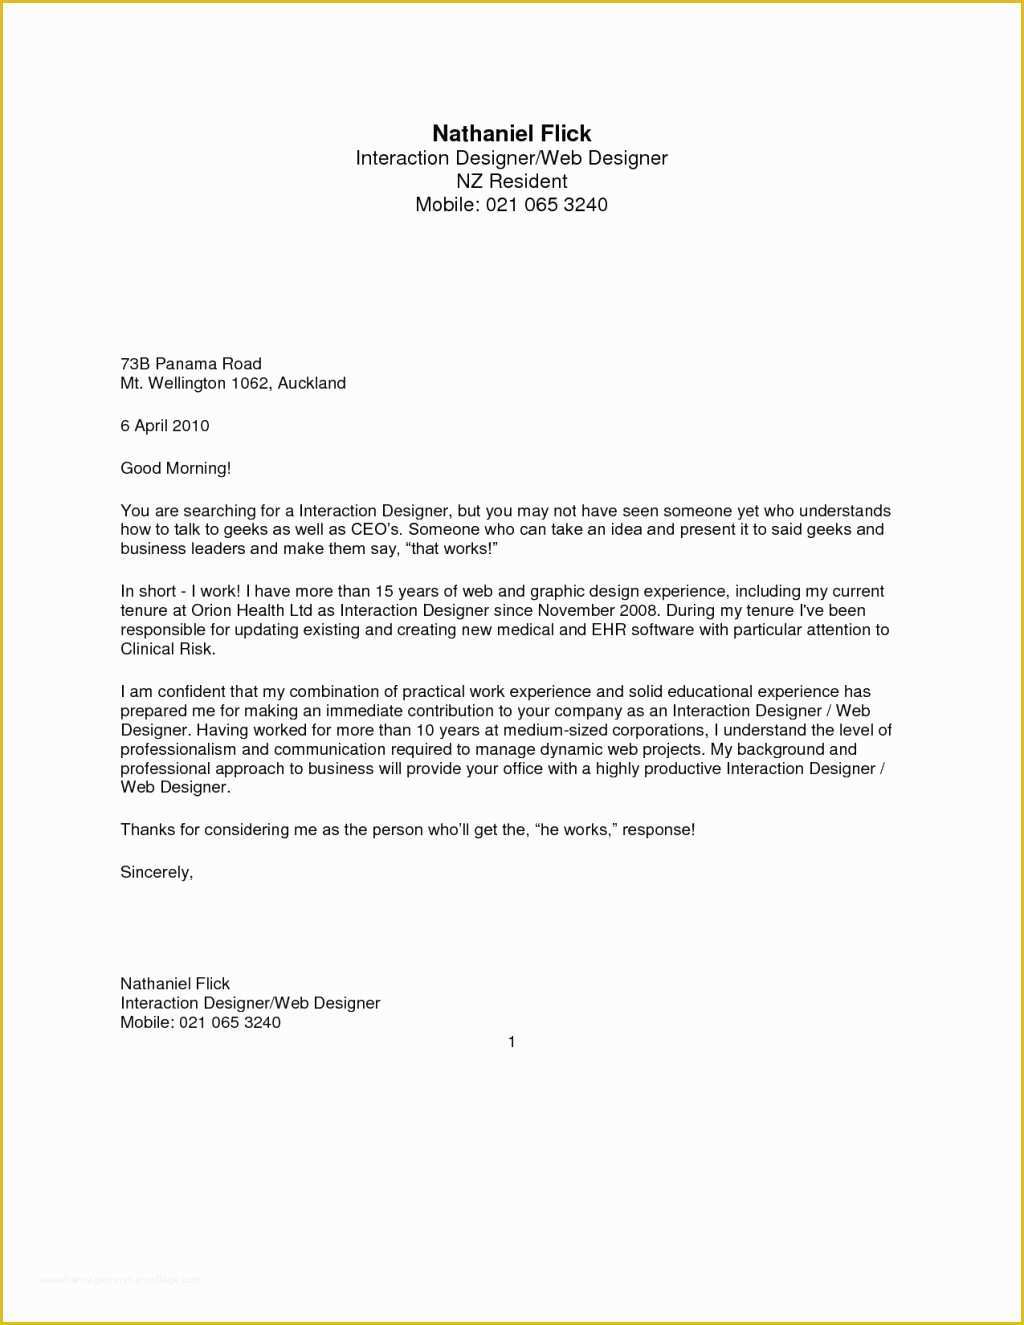 Free Matching Cover Letter and Resume Templates Of Resume and Template Resume and Cover Letter Examples